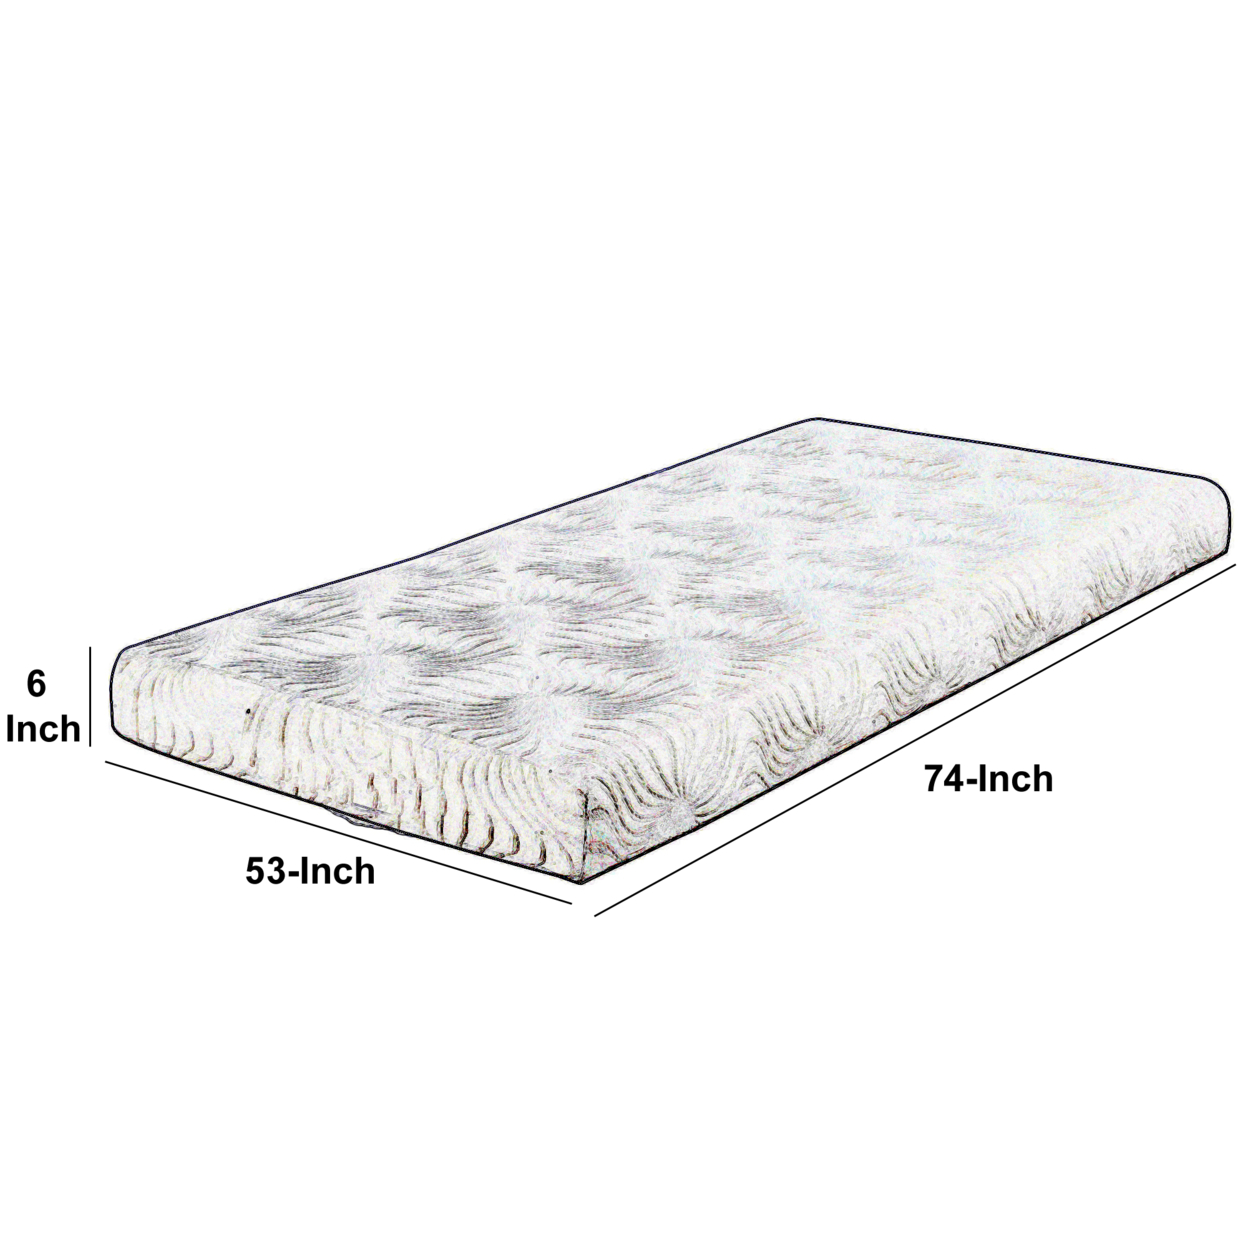 53 Inch Full Size Mattress, Patterned Fabric Upholstery, White